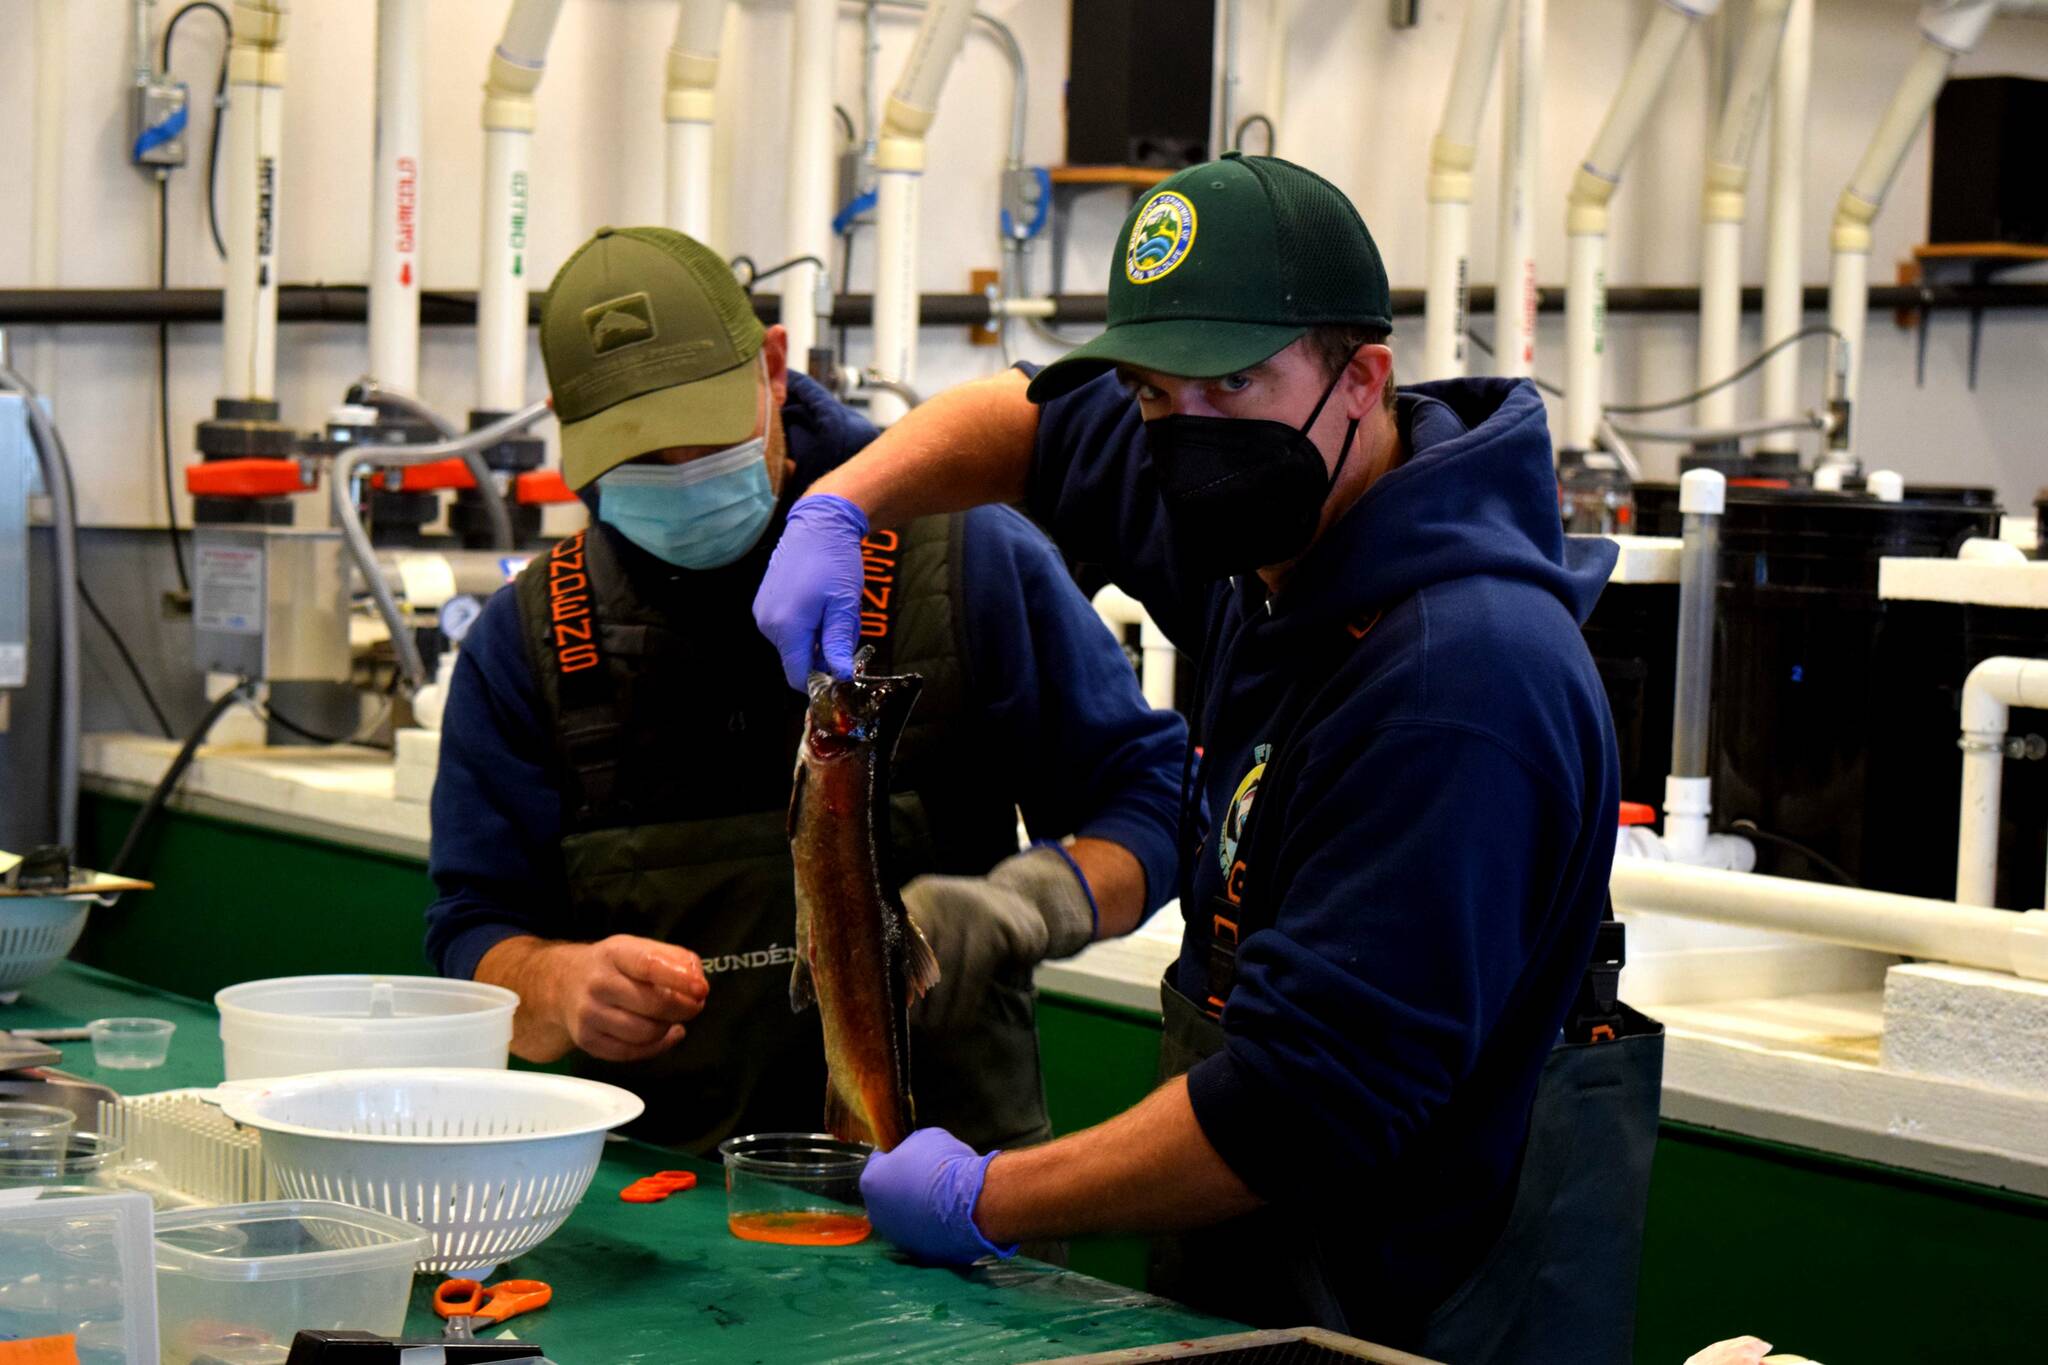 Washington Department of Fish and Wildlife workers extract eggs from a female kokanee at the Issaquah Salmon Hatchery. Photo by Conor Wilson/Valley Record.